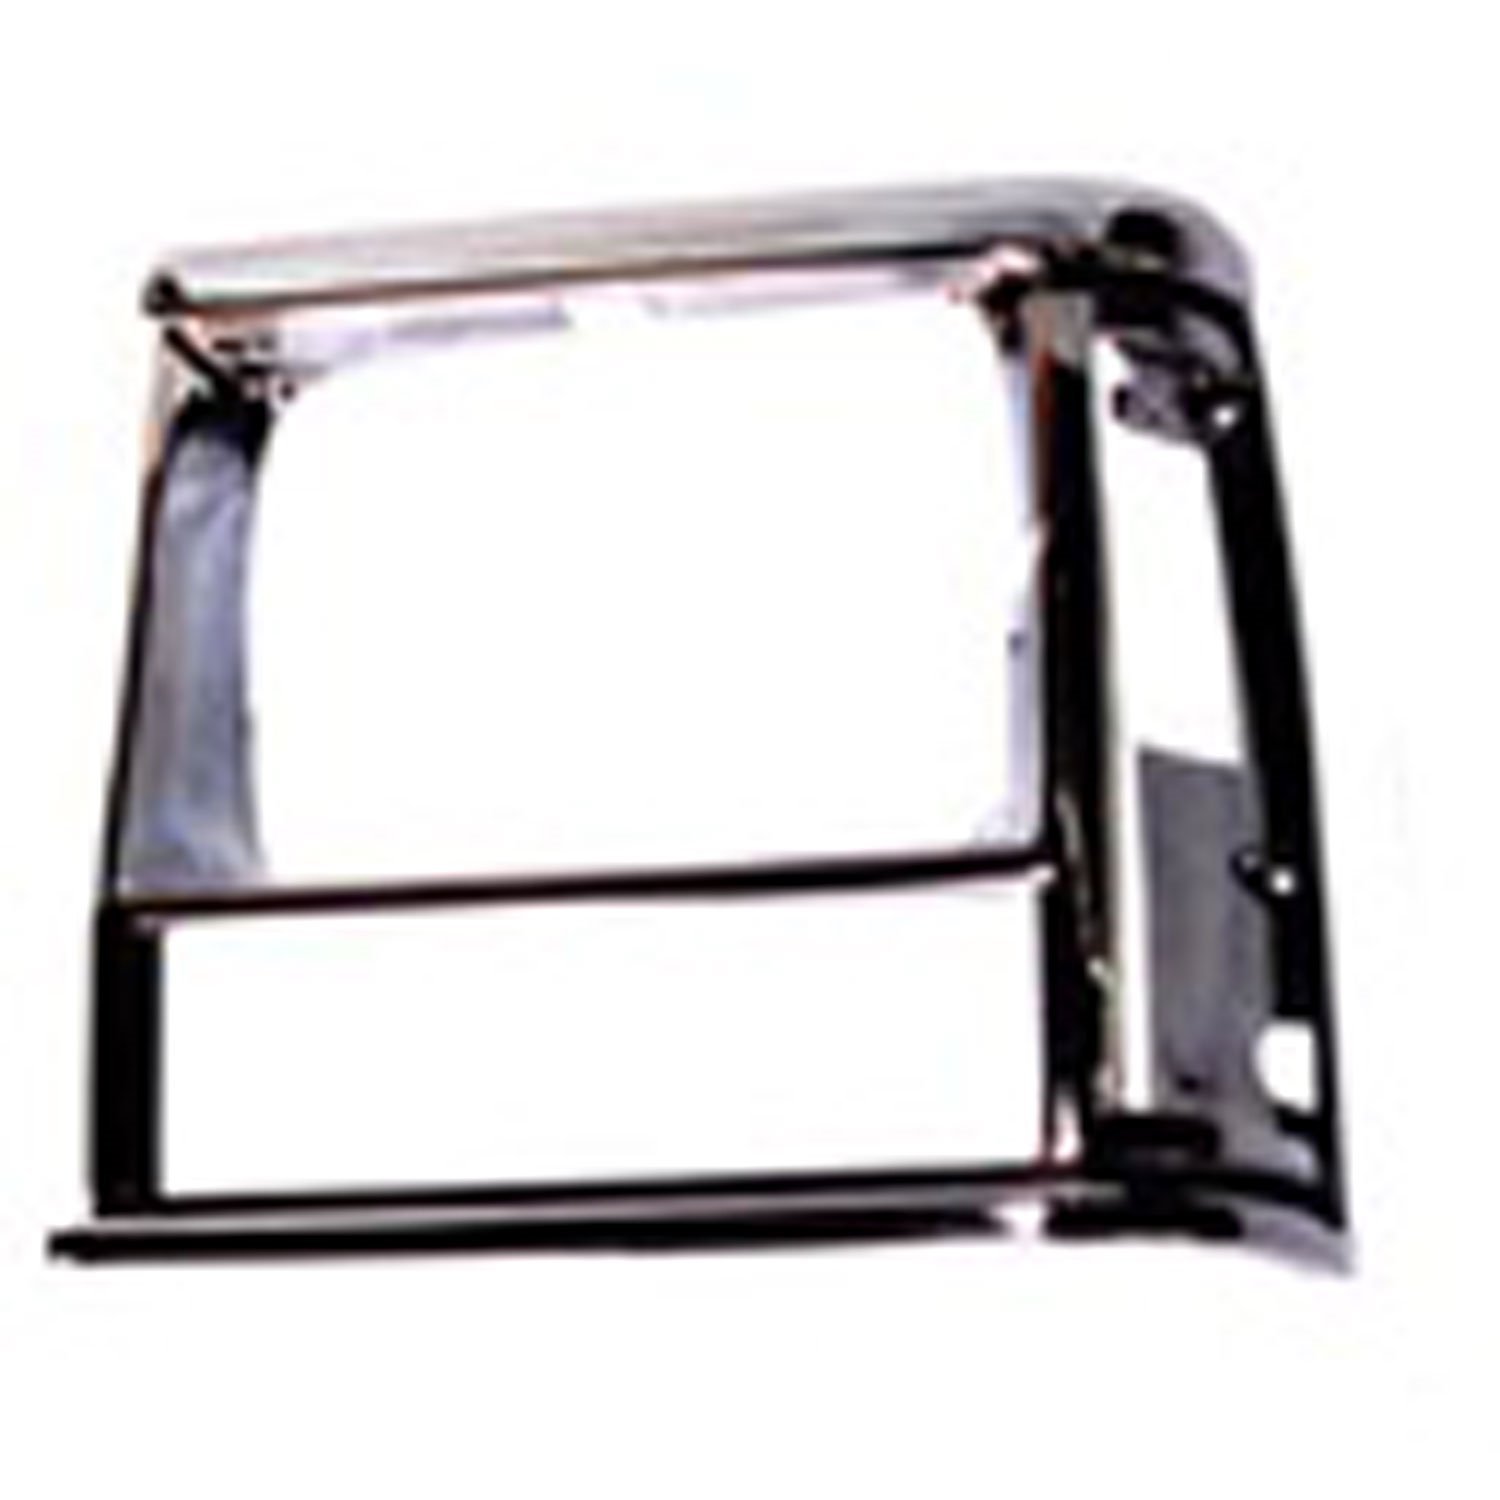 This black and chrome headlight bezel from Omix-ADA fits the left side on 91-96 Jeep Cherokee XJ.